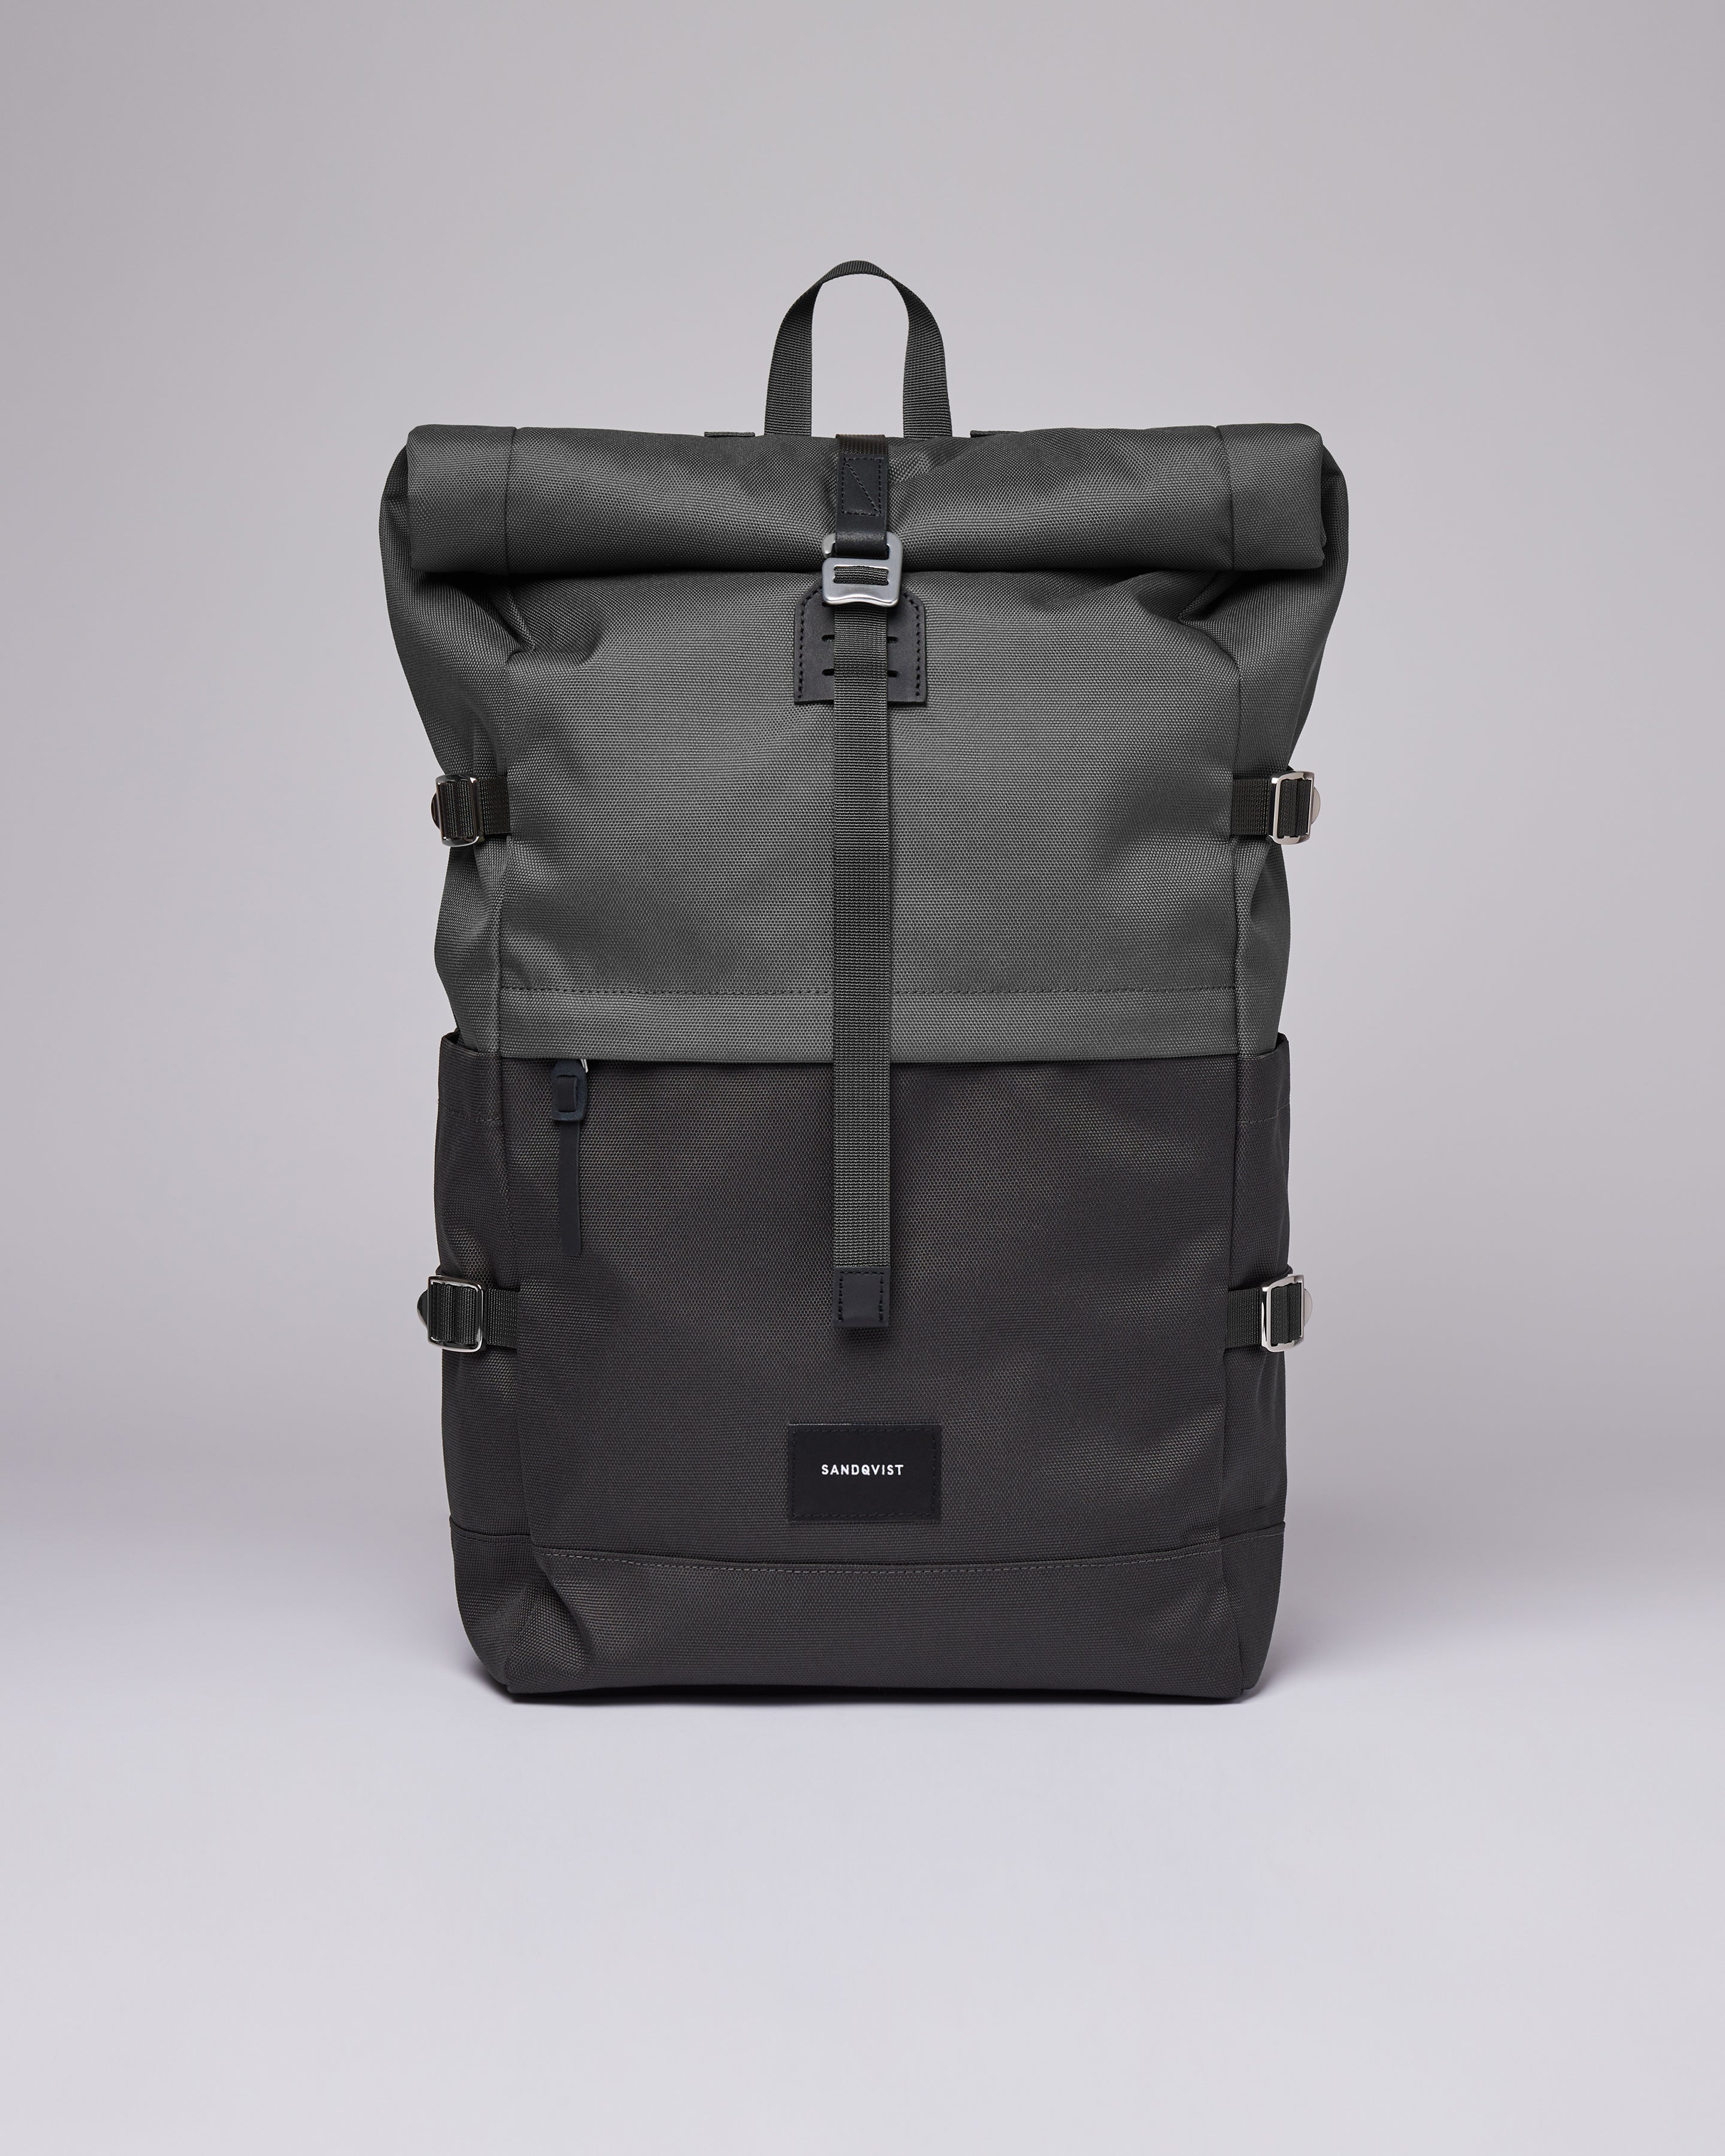 Sandqvist Bernt Backpack in Dark Grey SQA2054 | Shop from eightywingold an official brand partner for Sandqvist Canada and US.